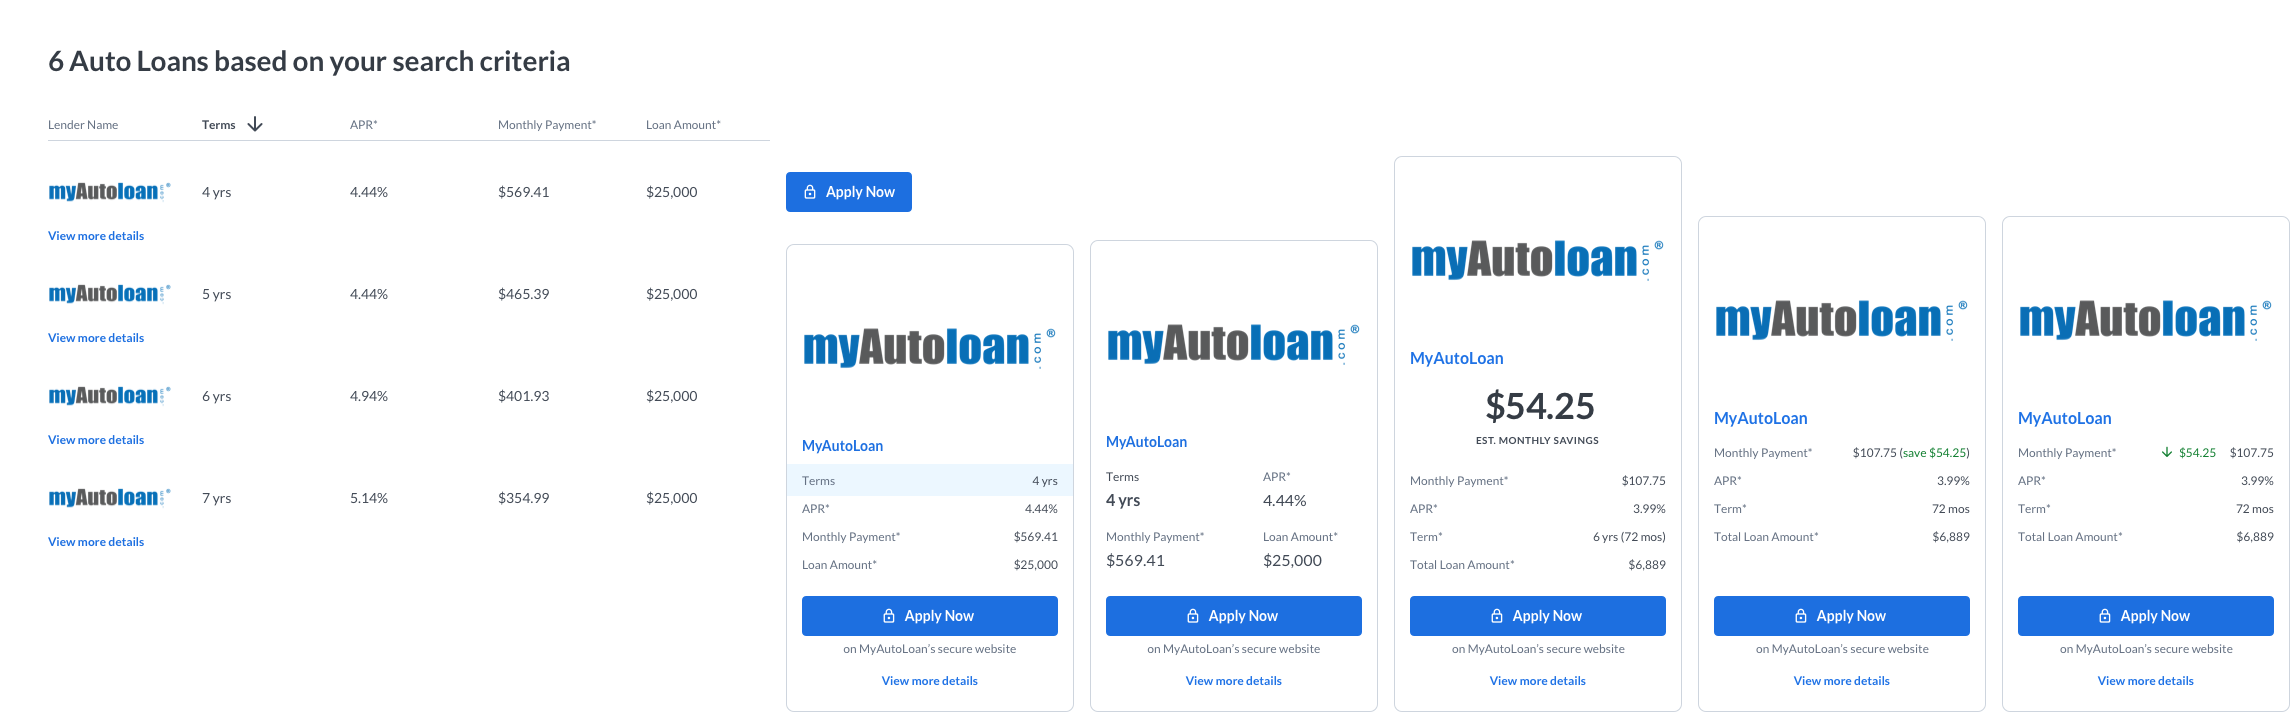 explorations of displaying data points in auto loan offer cards